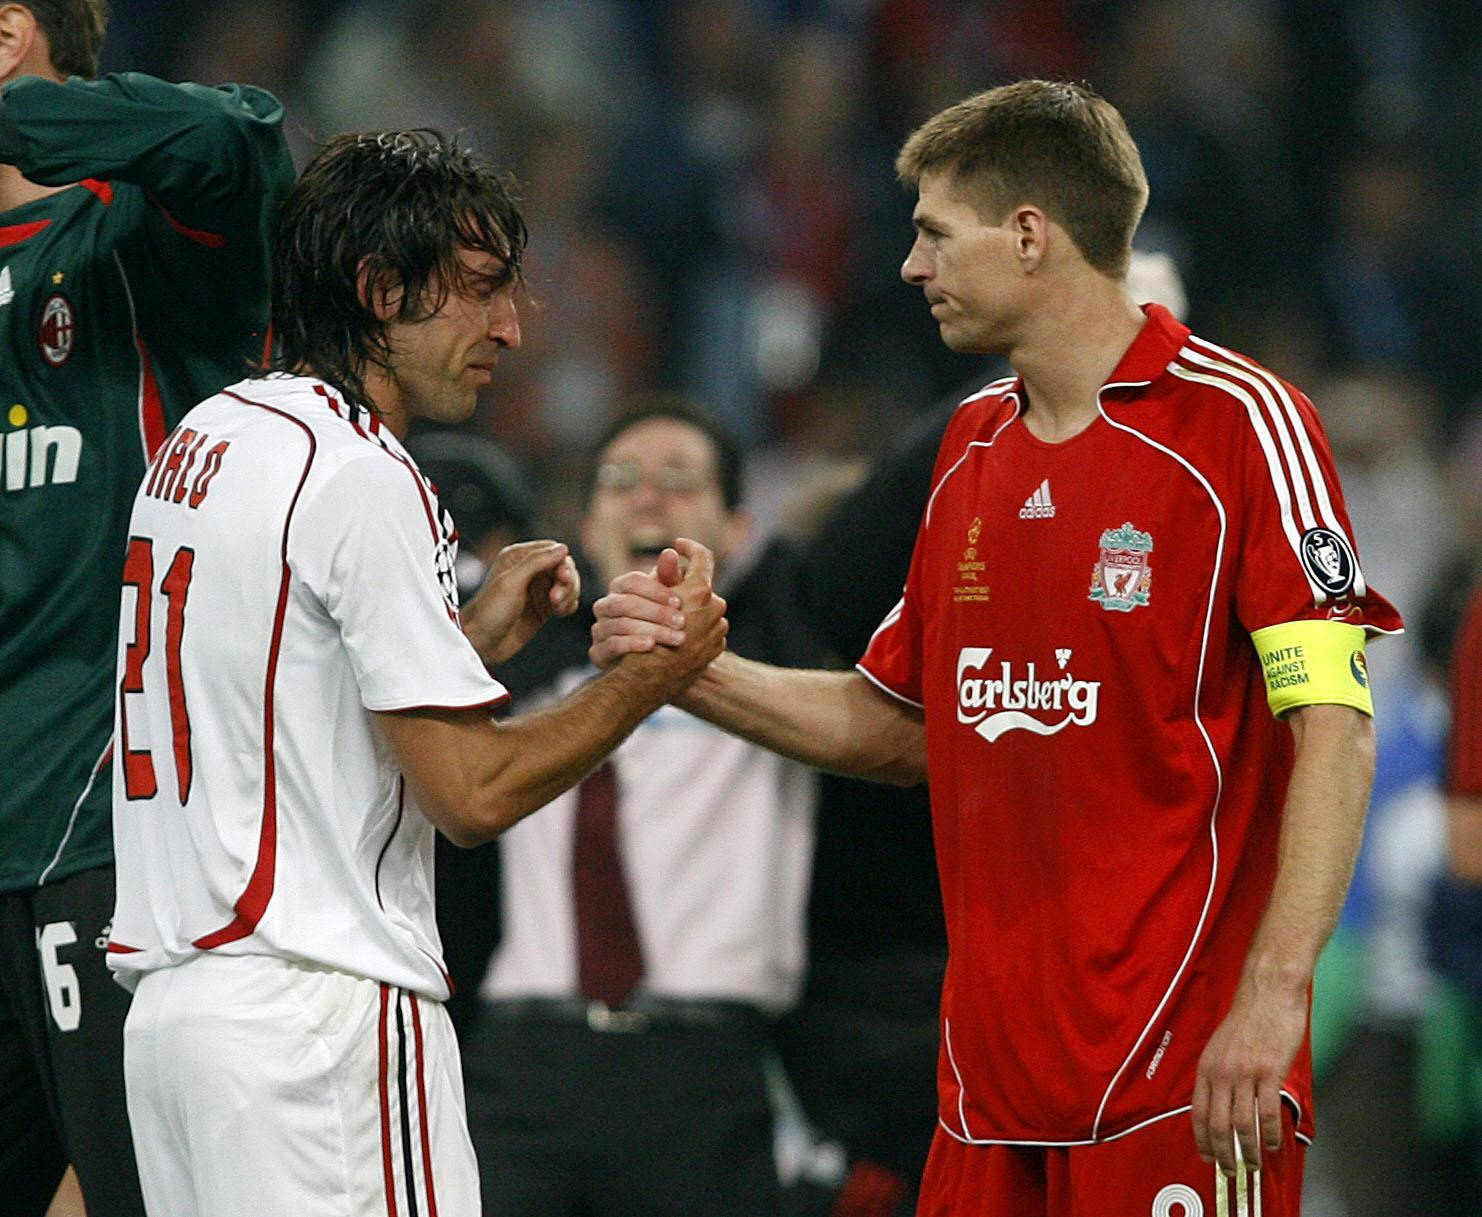 Gerrard and Pirlo met in two Champions League finals, the Euro 2012 quarter final and in the MLS. Image: PA Images